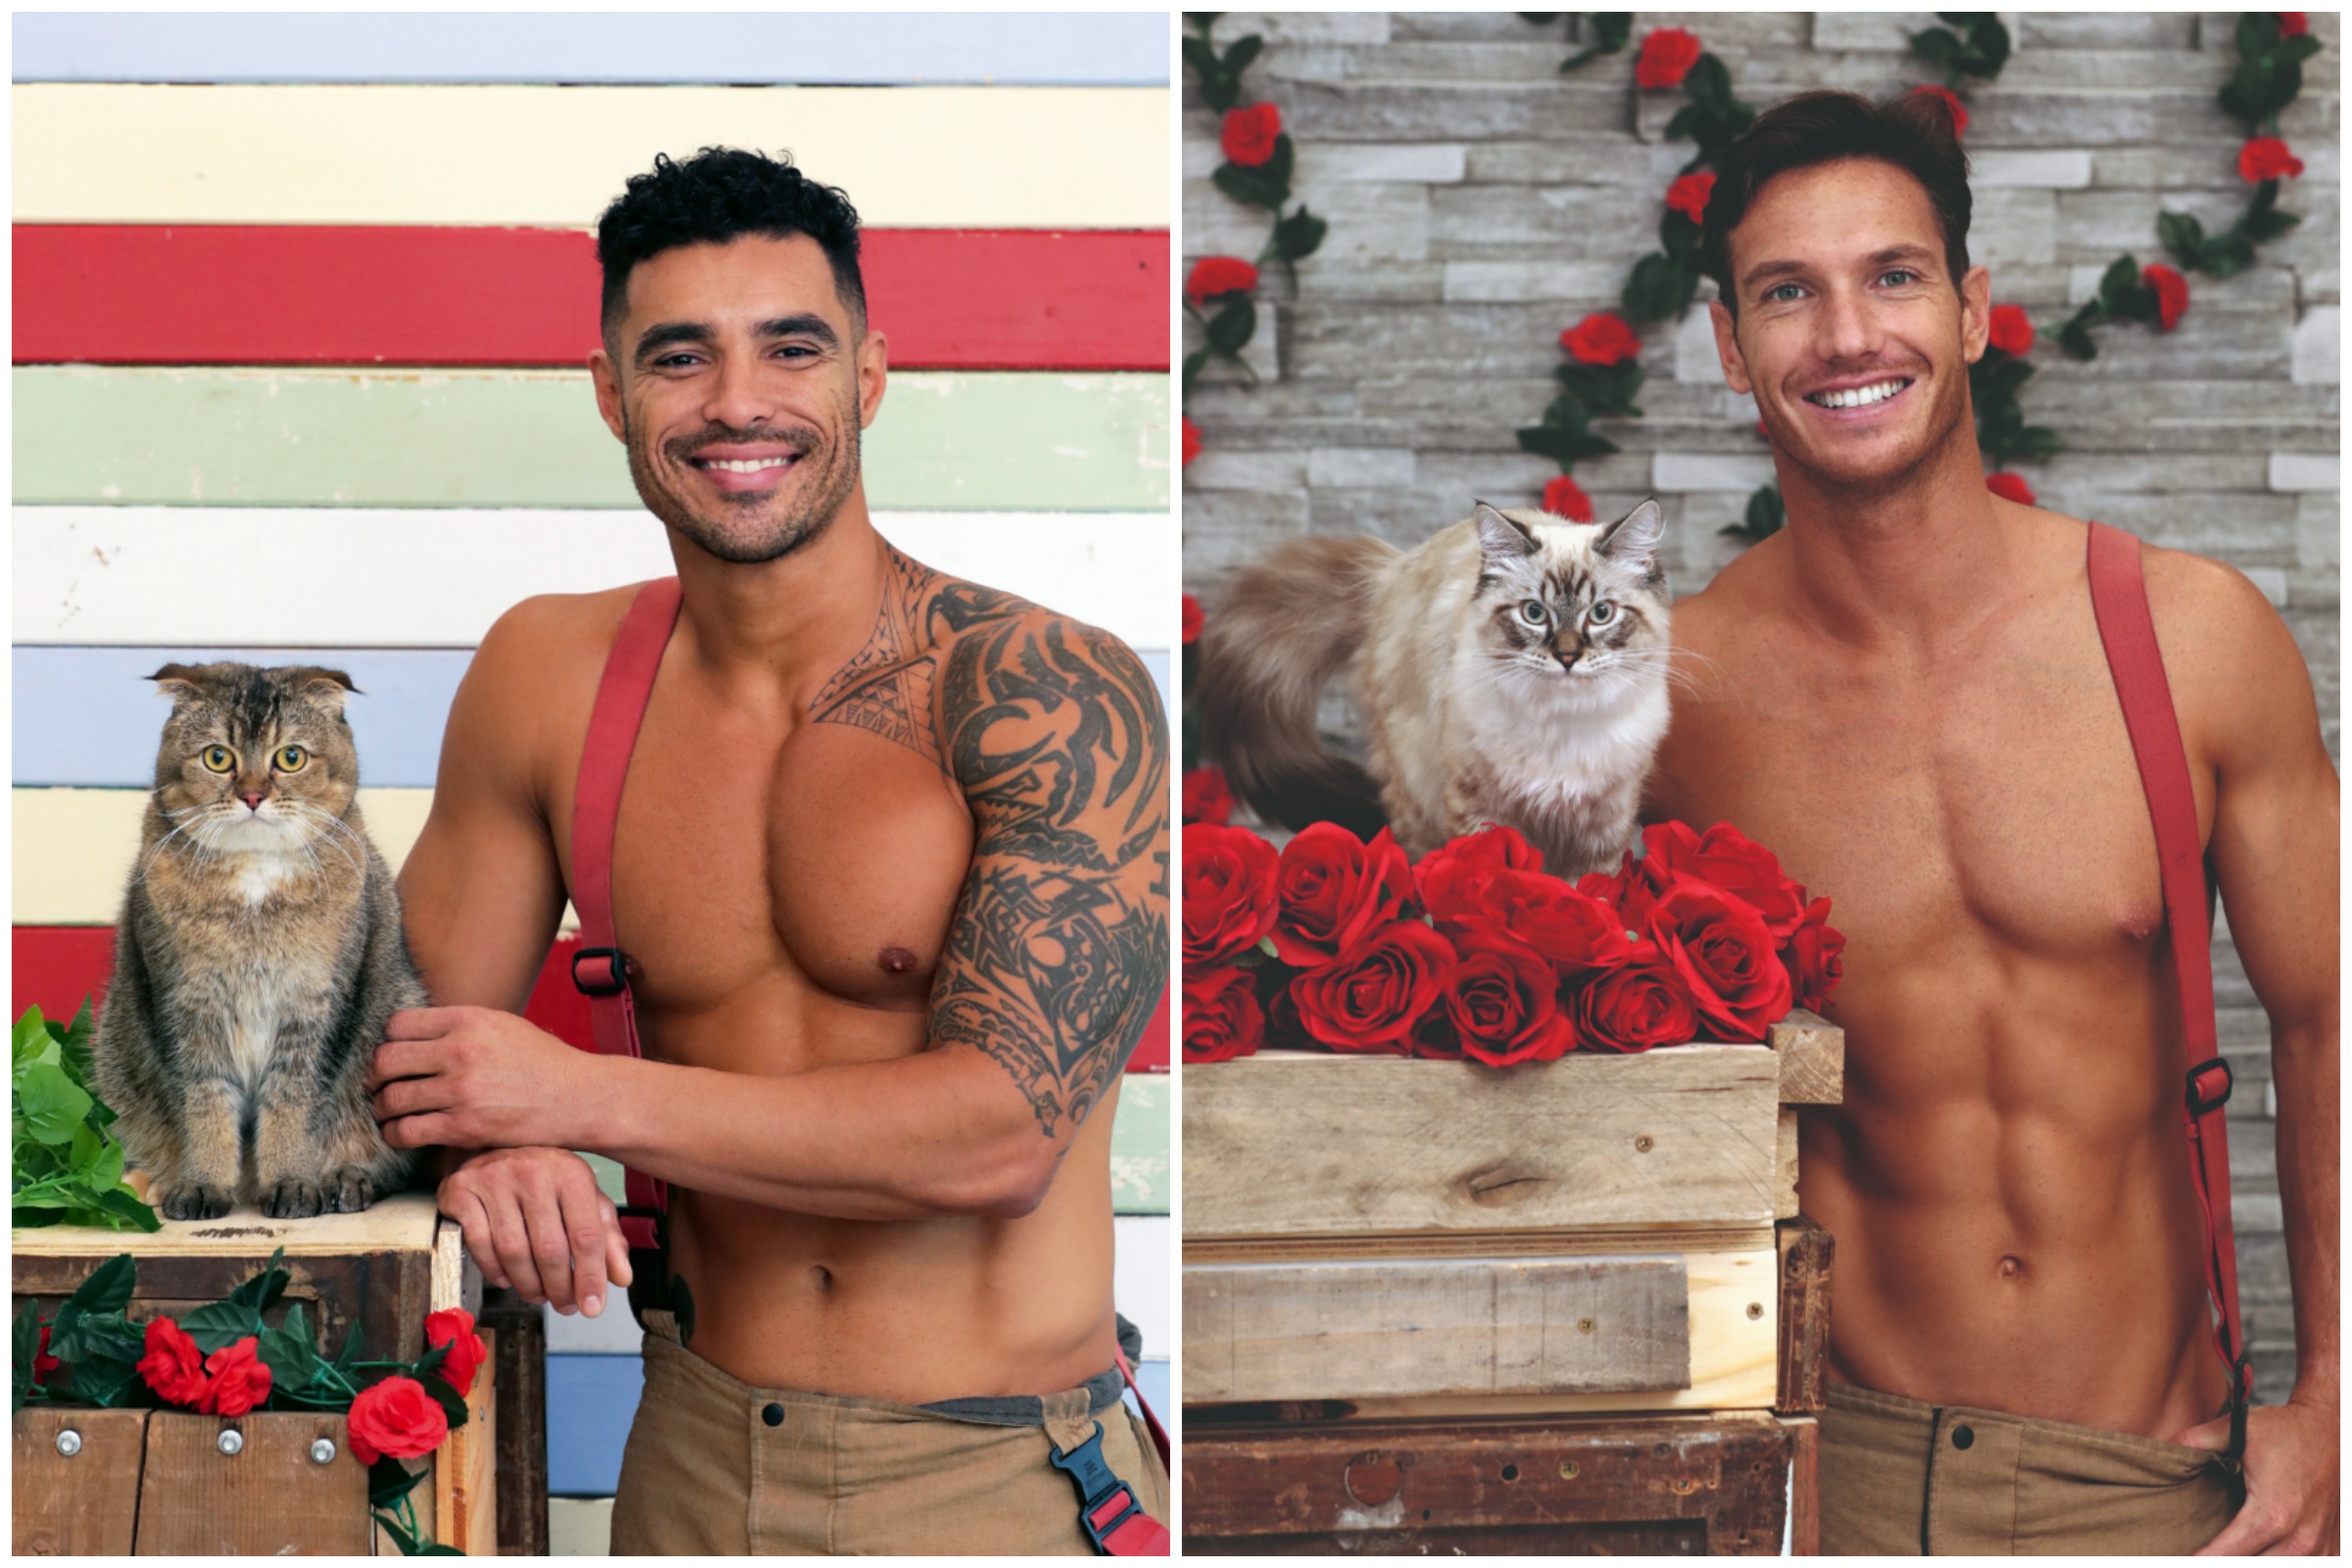 Firefighters Pose Topless With Cats in Scorching Hot 2022 Calendar